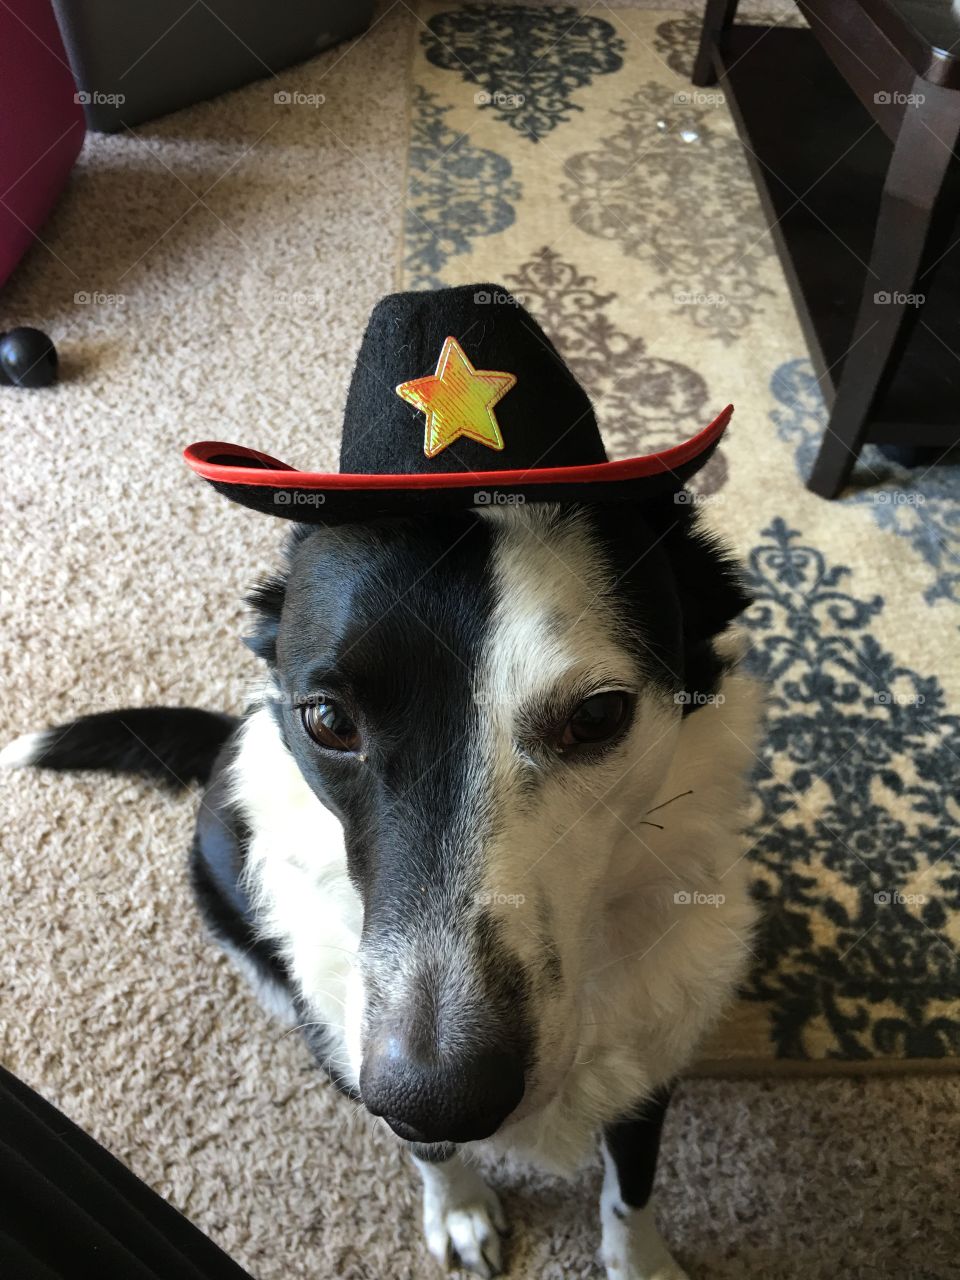 Dog with hat